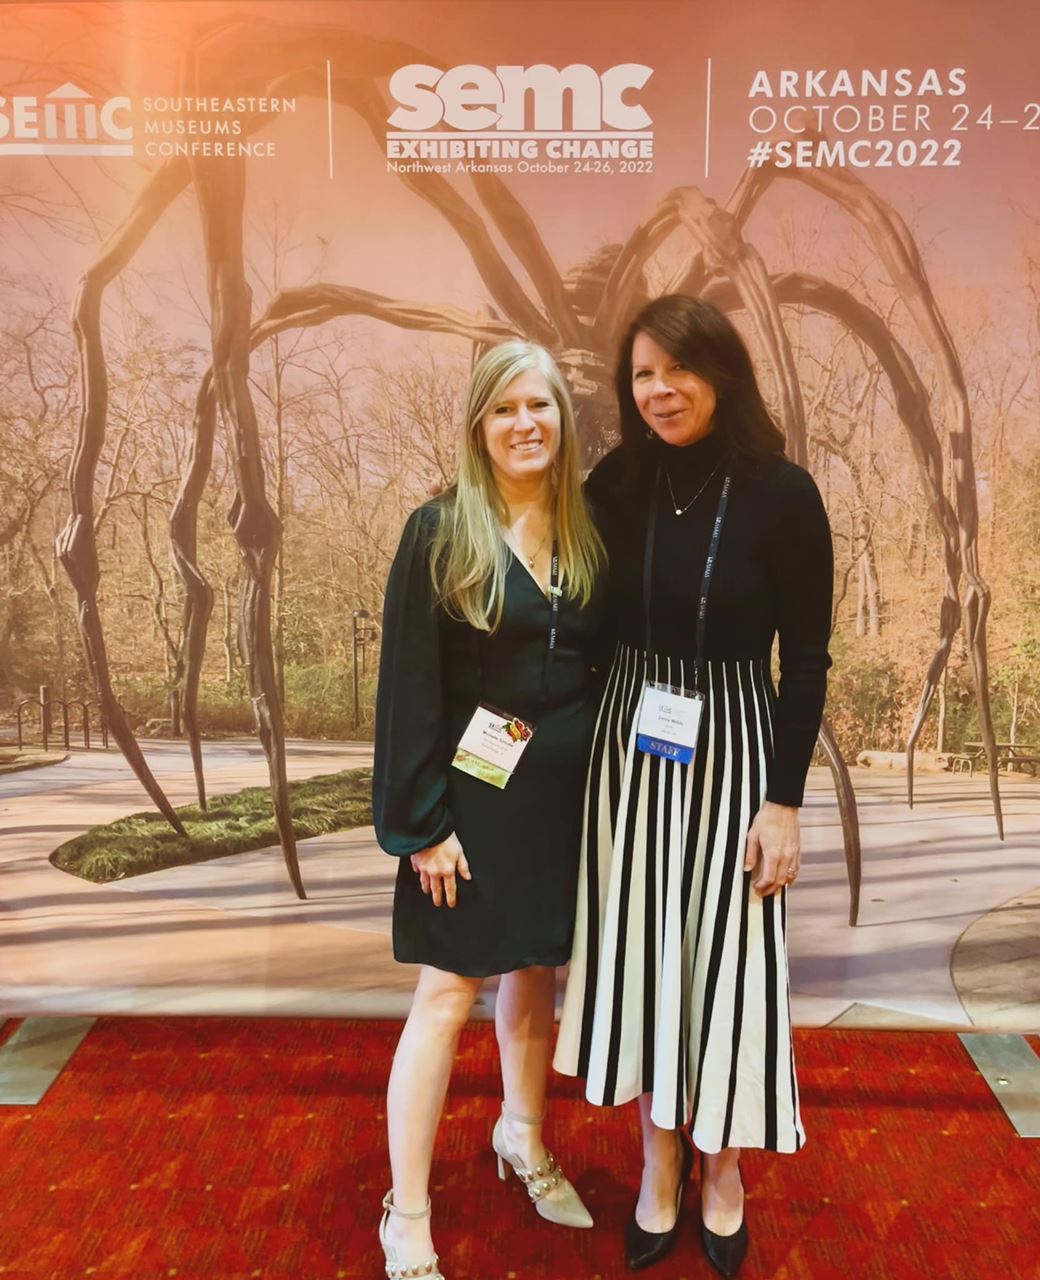 A picture of executive director Zinnia Willits (right) and a SEMC member at the 2022 annual conference in Arkansas